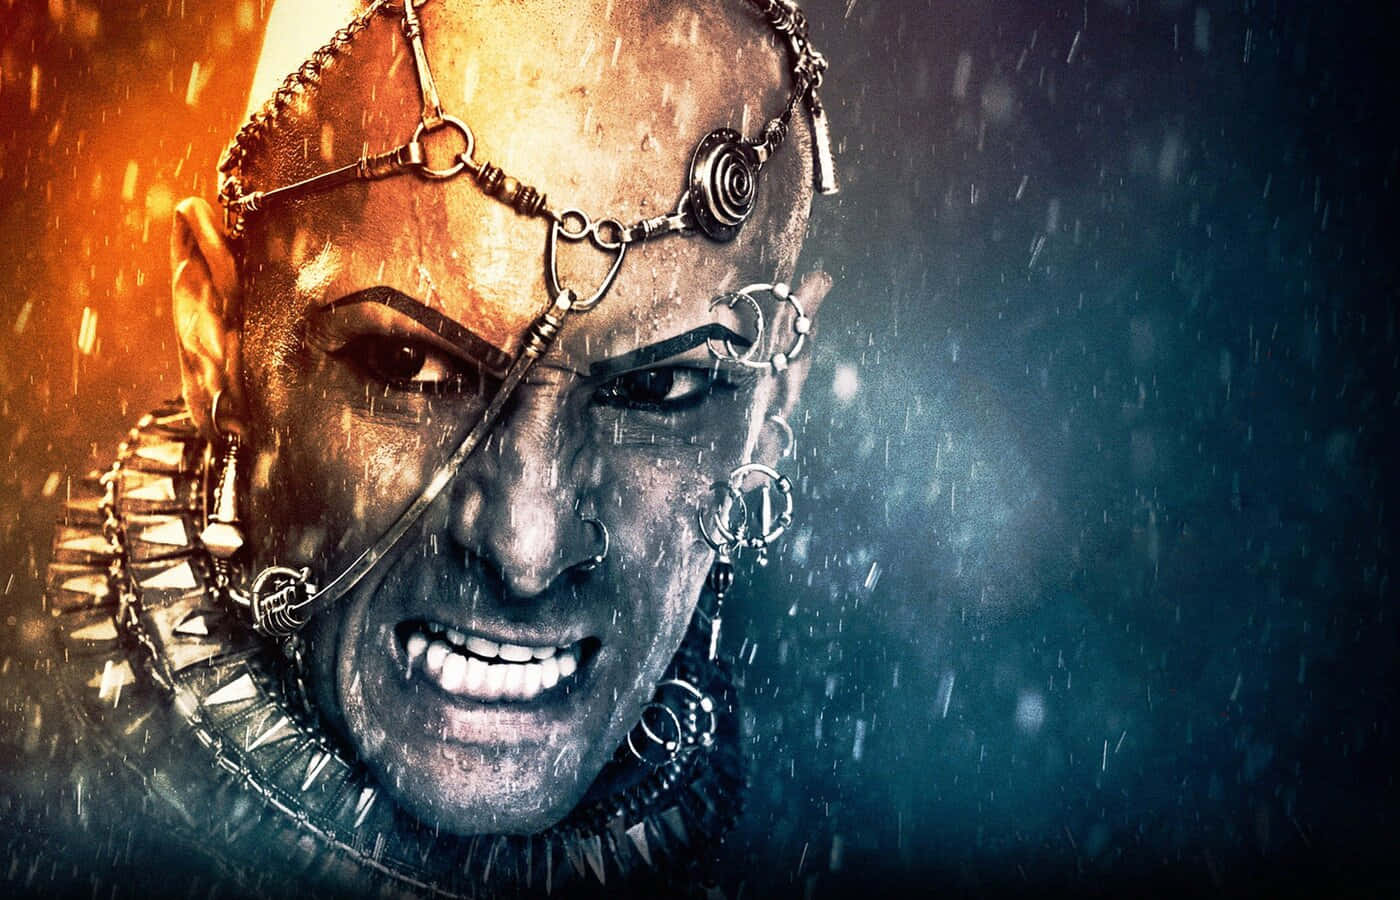 300 Movie With The Chained Face Of Xerxes Wallpaper